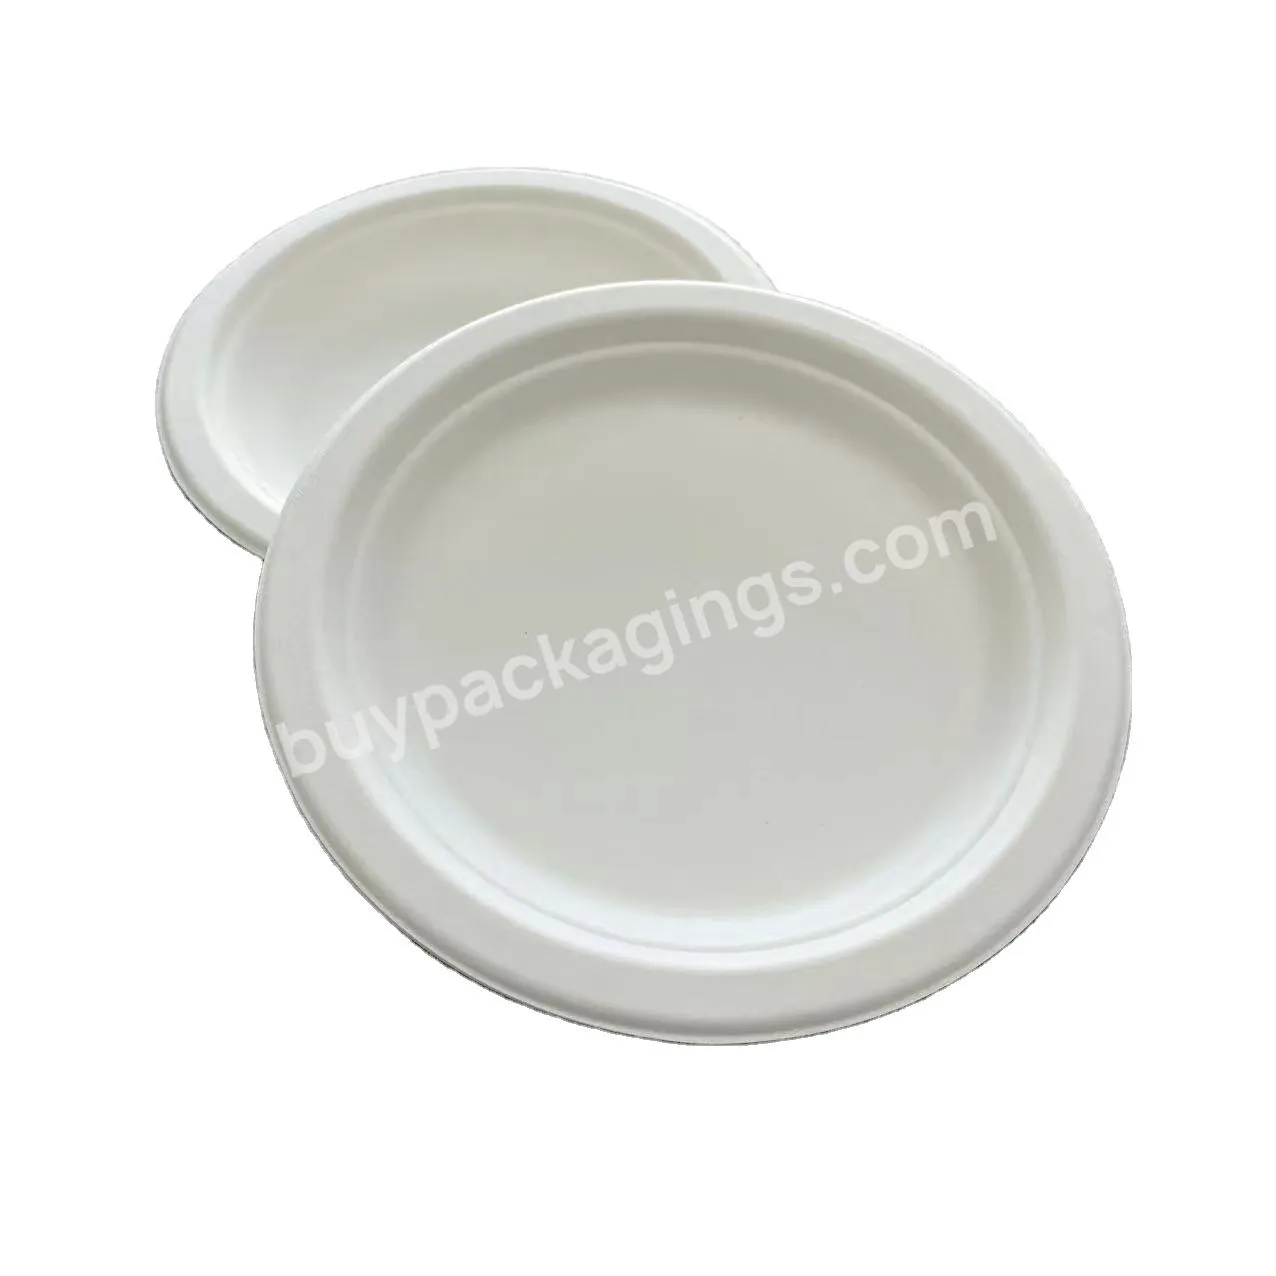 Custom Sugarcane Takeout 7inch Pulp Happy Birthday Disposable Plastic Paper Plate Holders 150 Pack - Buy Sugarcane Pulp Plate,Plastic Paper Plate Holders,Paper Plates 150 Pack.